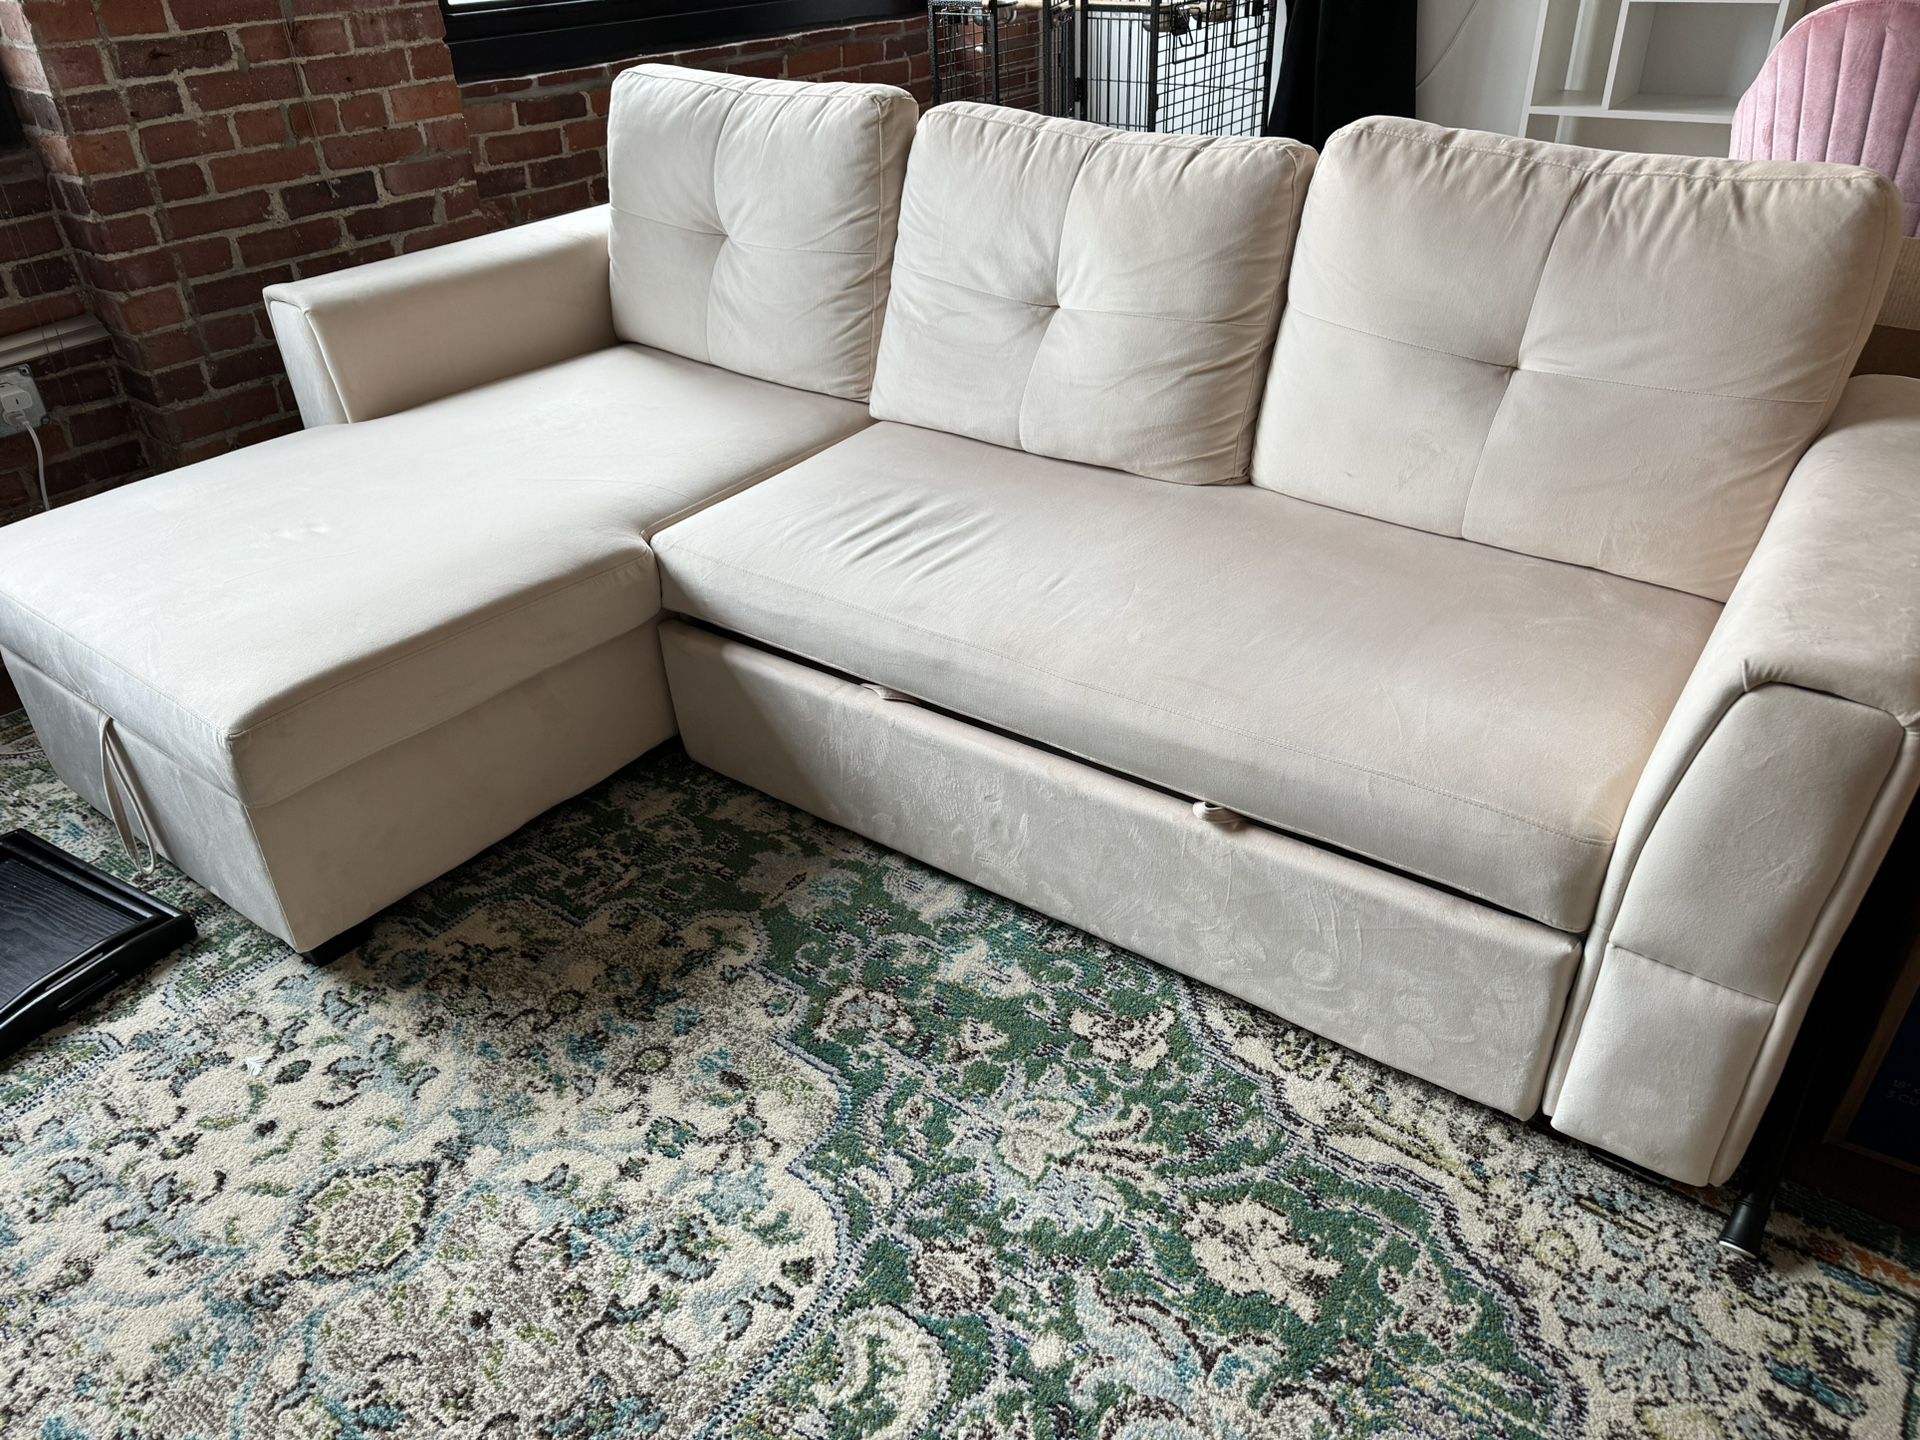 Cream Sleeper Sectional Couch With Storage